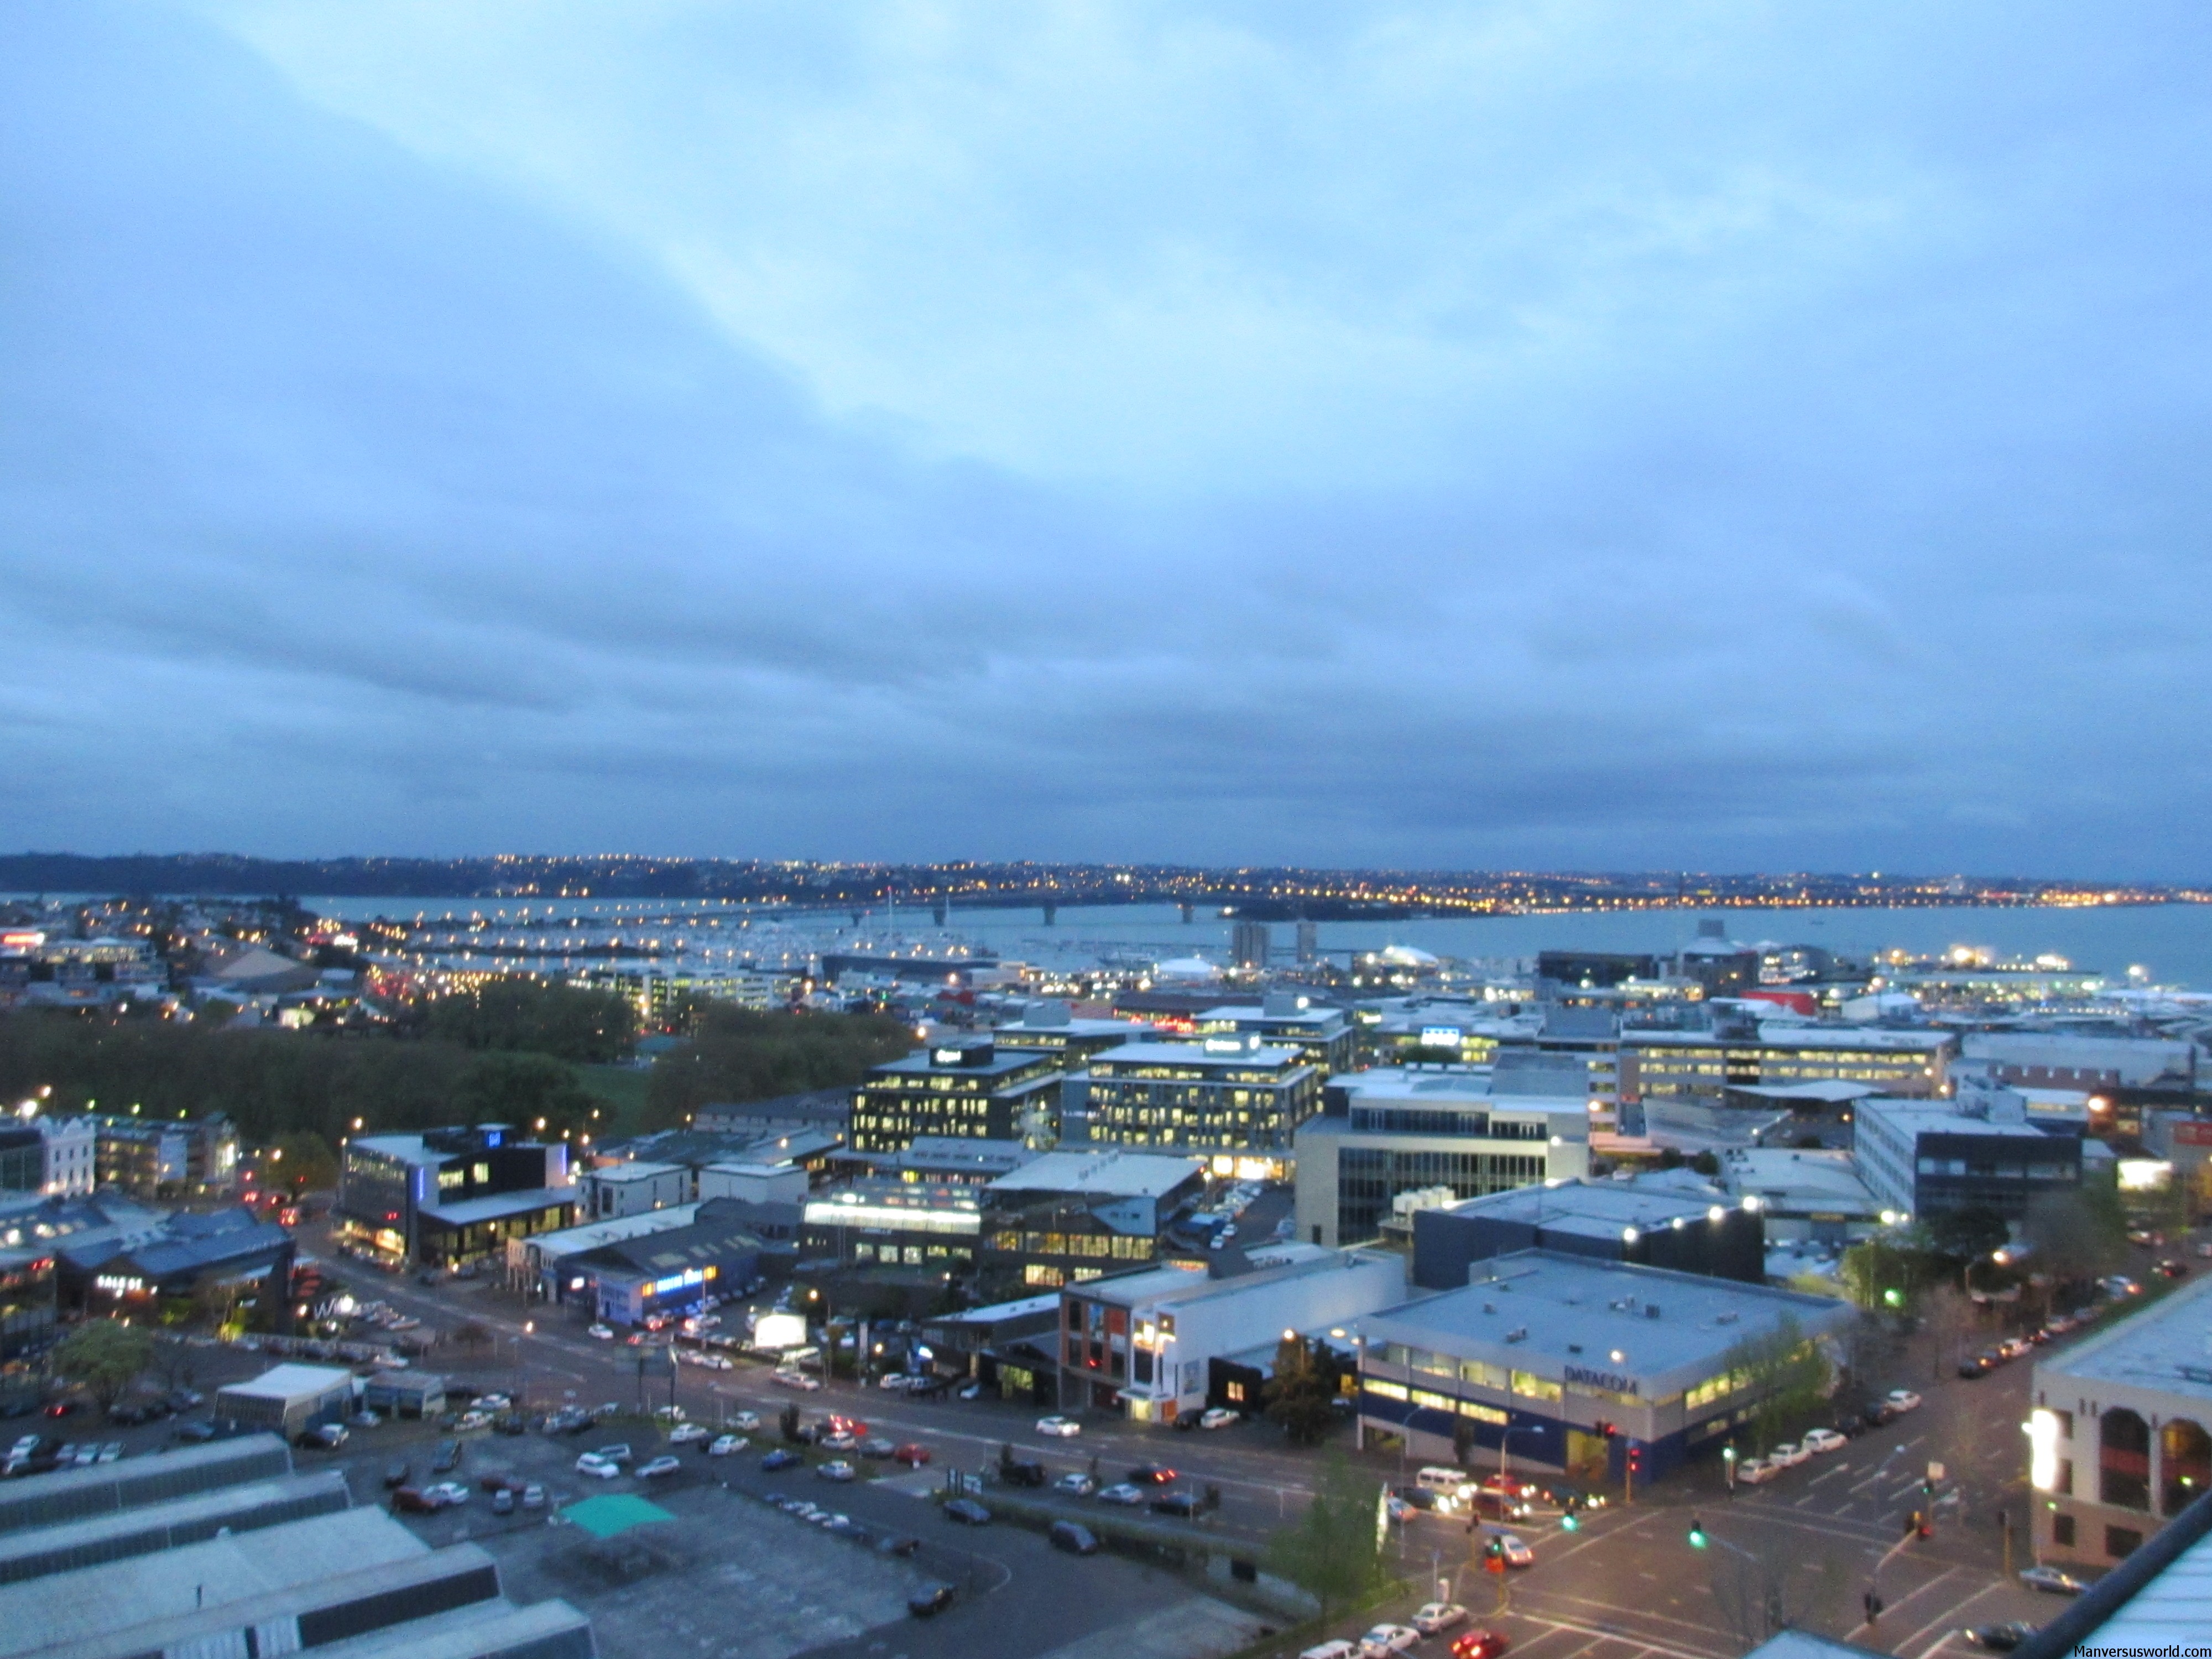 The view of Auckland's Hauraki Gulf from my apartment